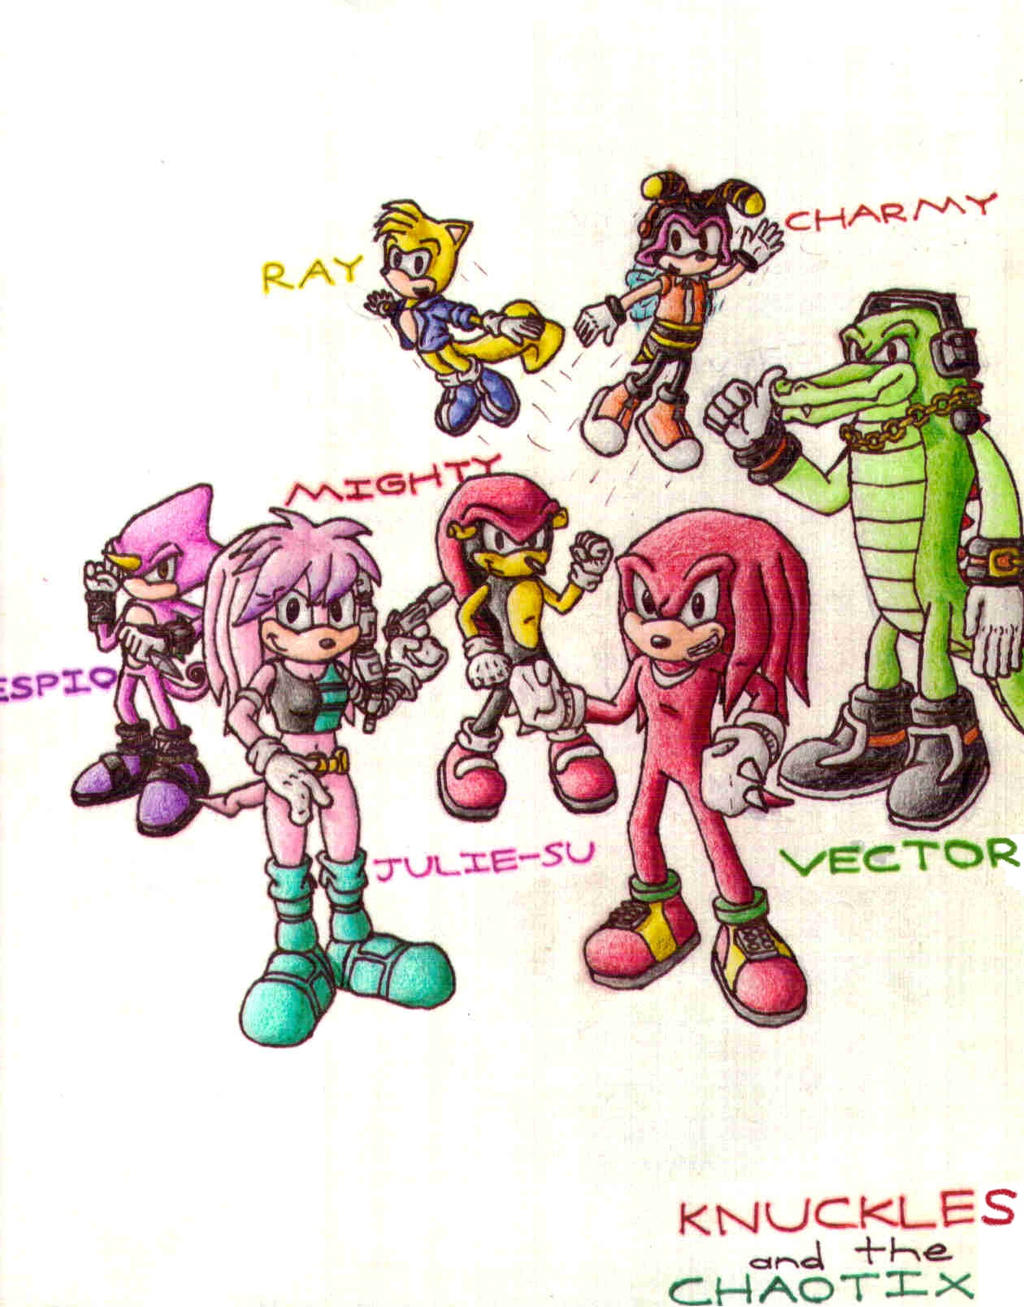 Knuckles and the Chaotix